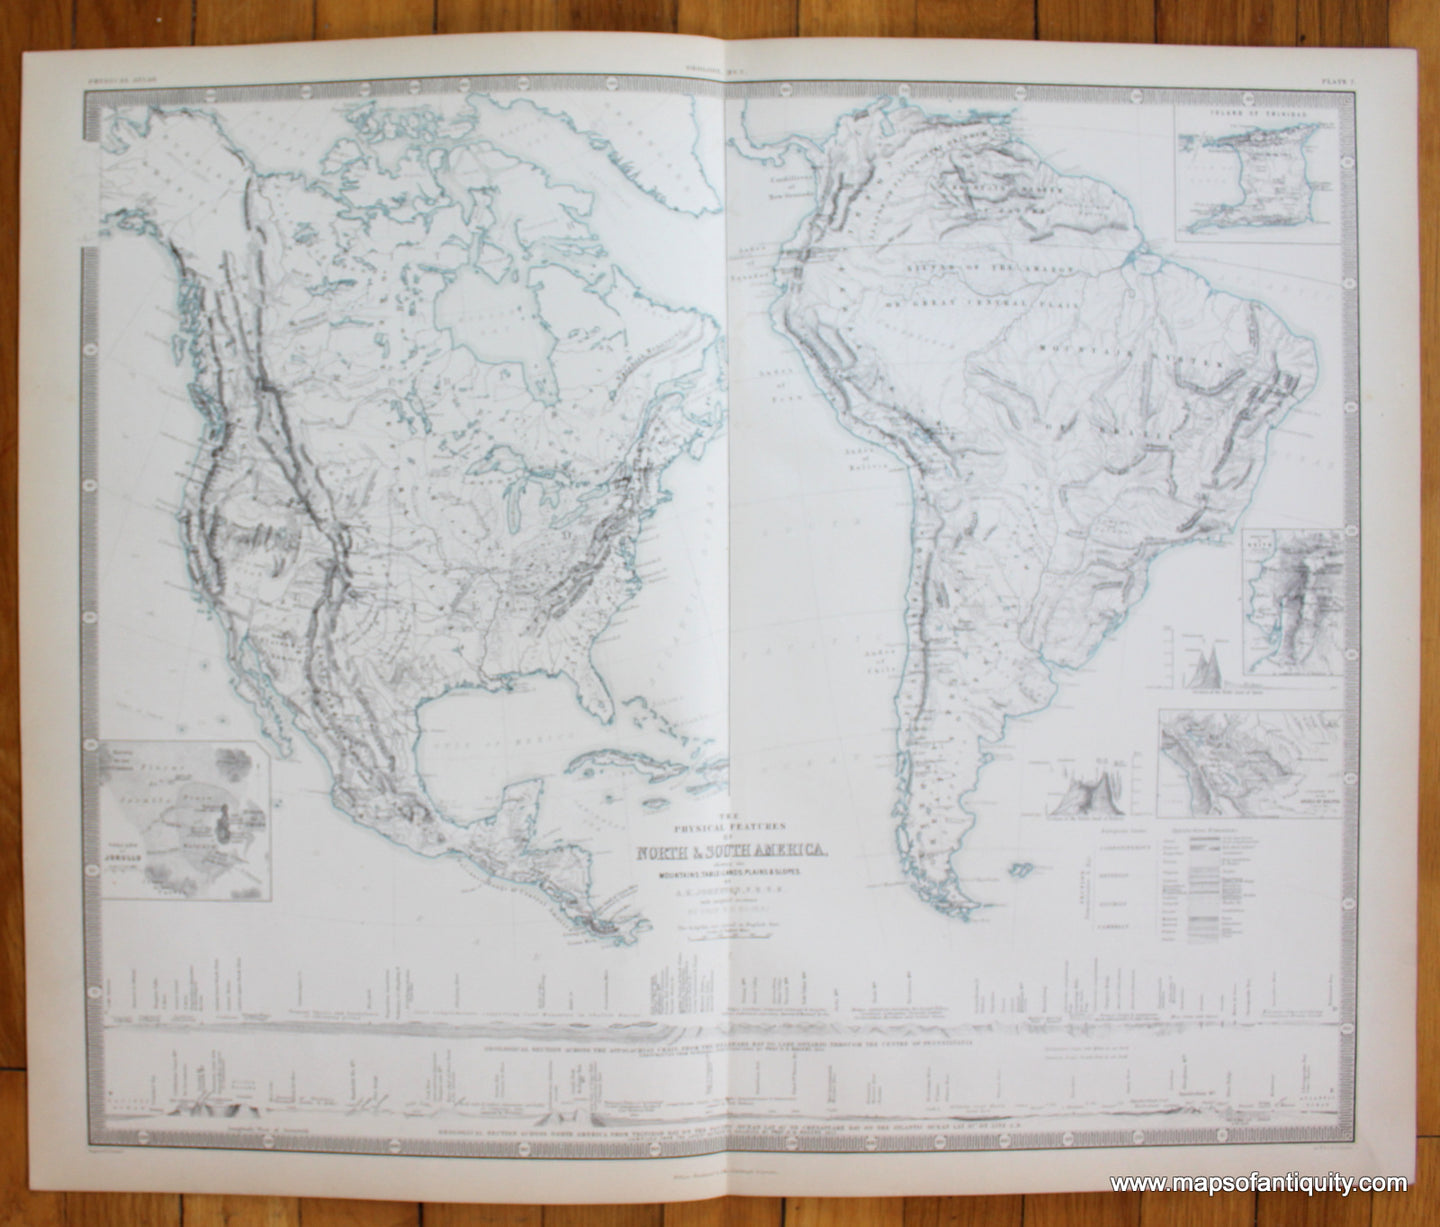 The-Physical-Features-of-North-and-South-America-Johnston-1856-Antique-Map-1850s-1800s